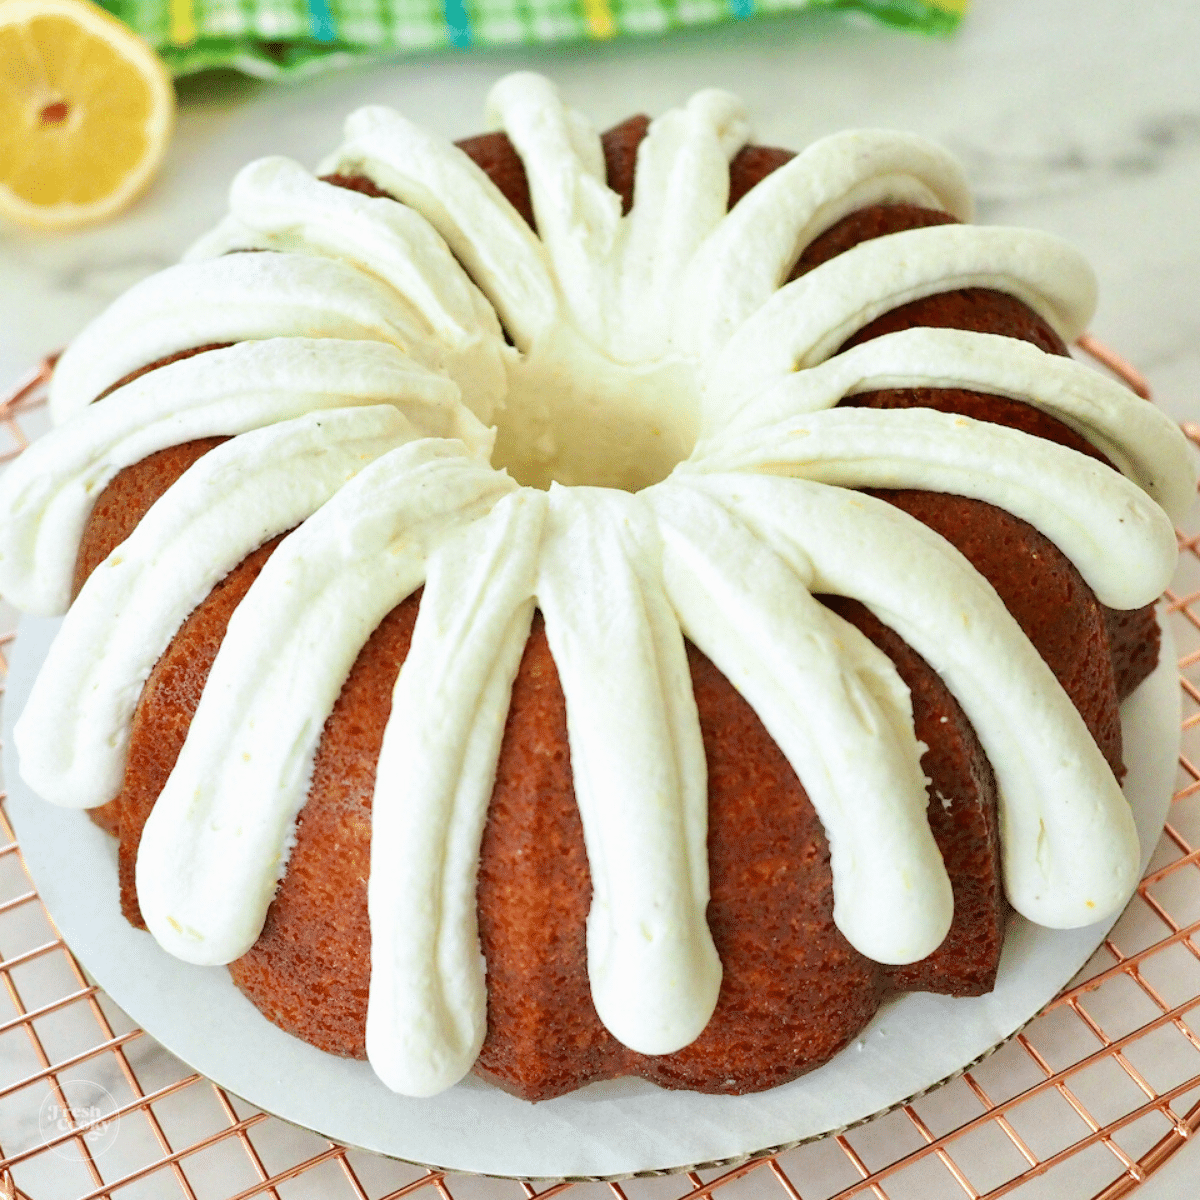 Soaked lemon cake Recipe | Food From Portugal